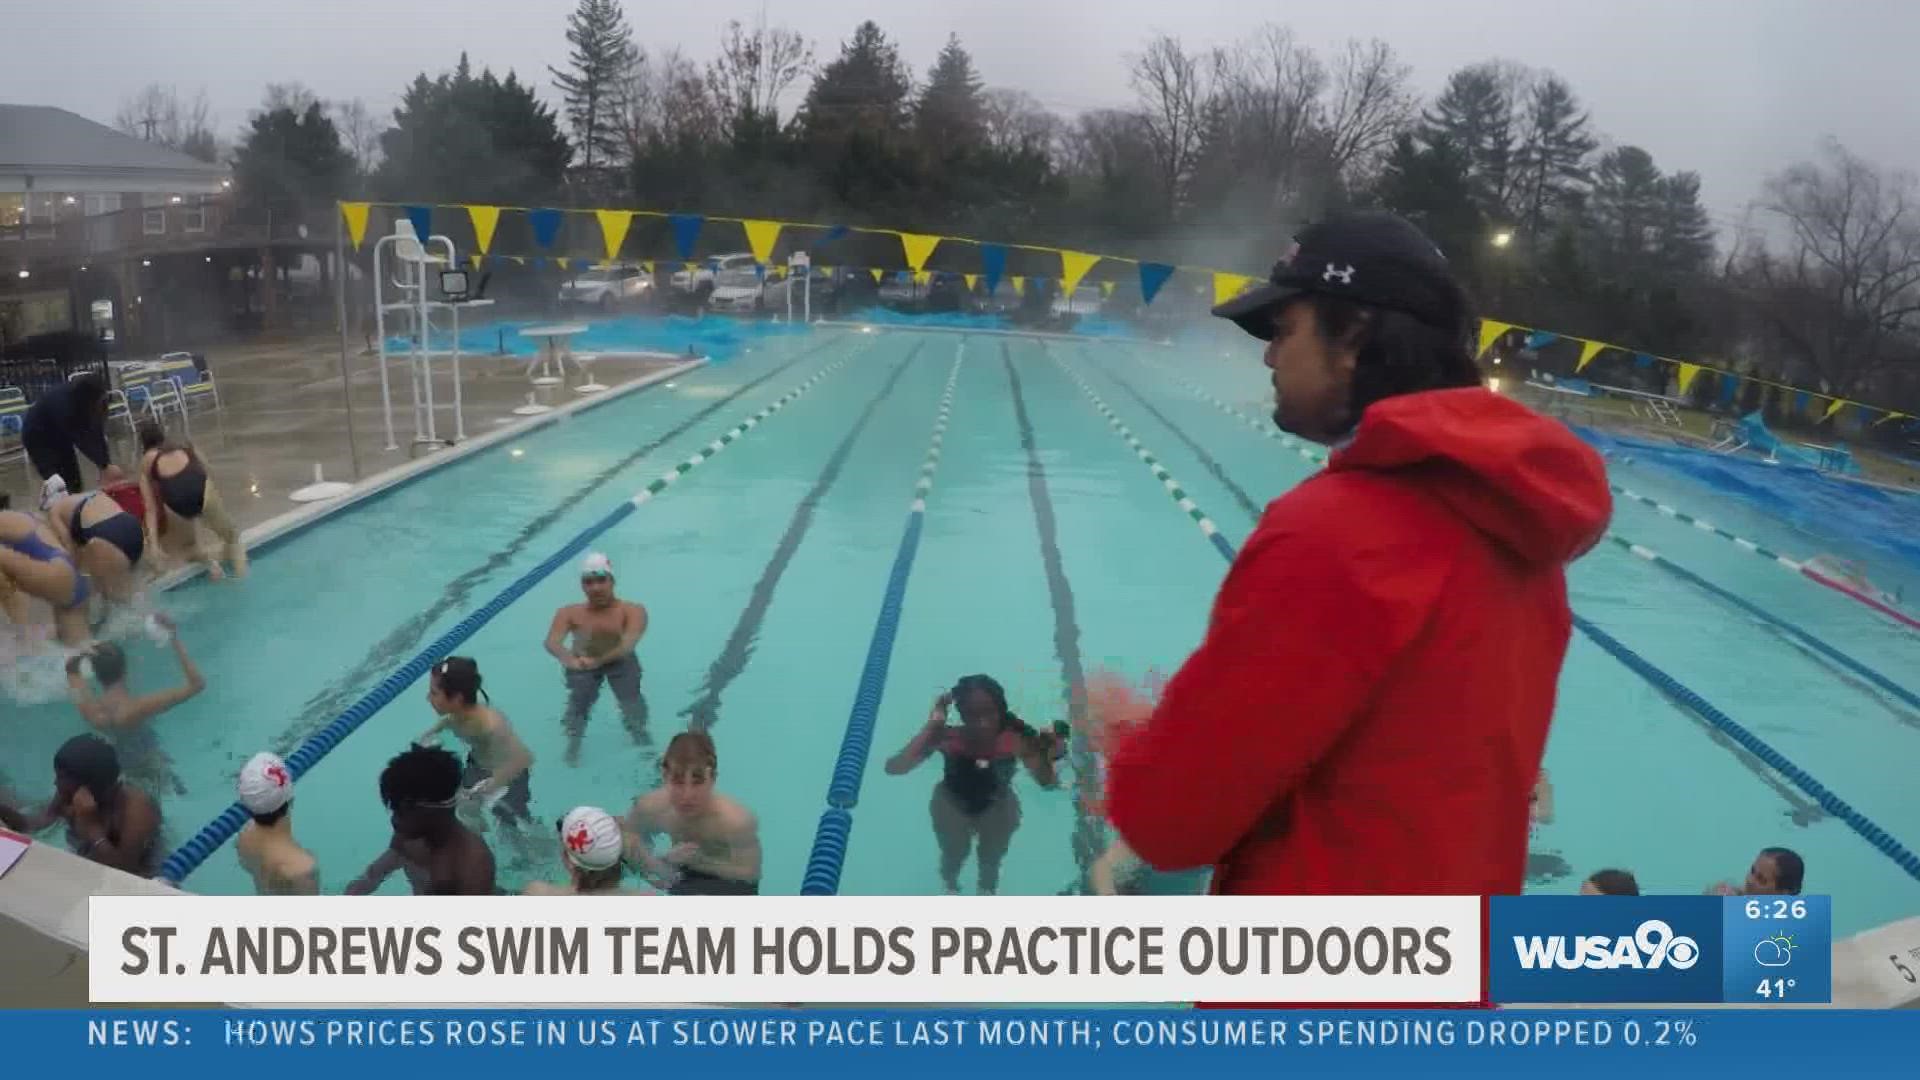 The St. Andrews swim team holds practice outdoors in the dead of winter in Maryland.